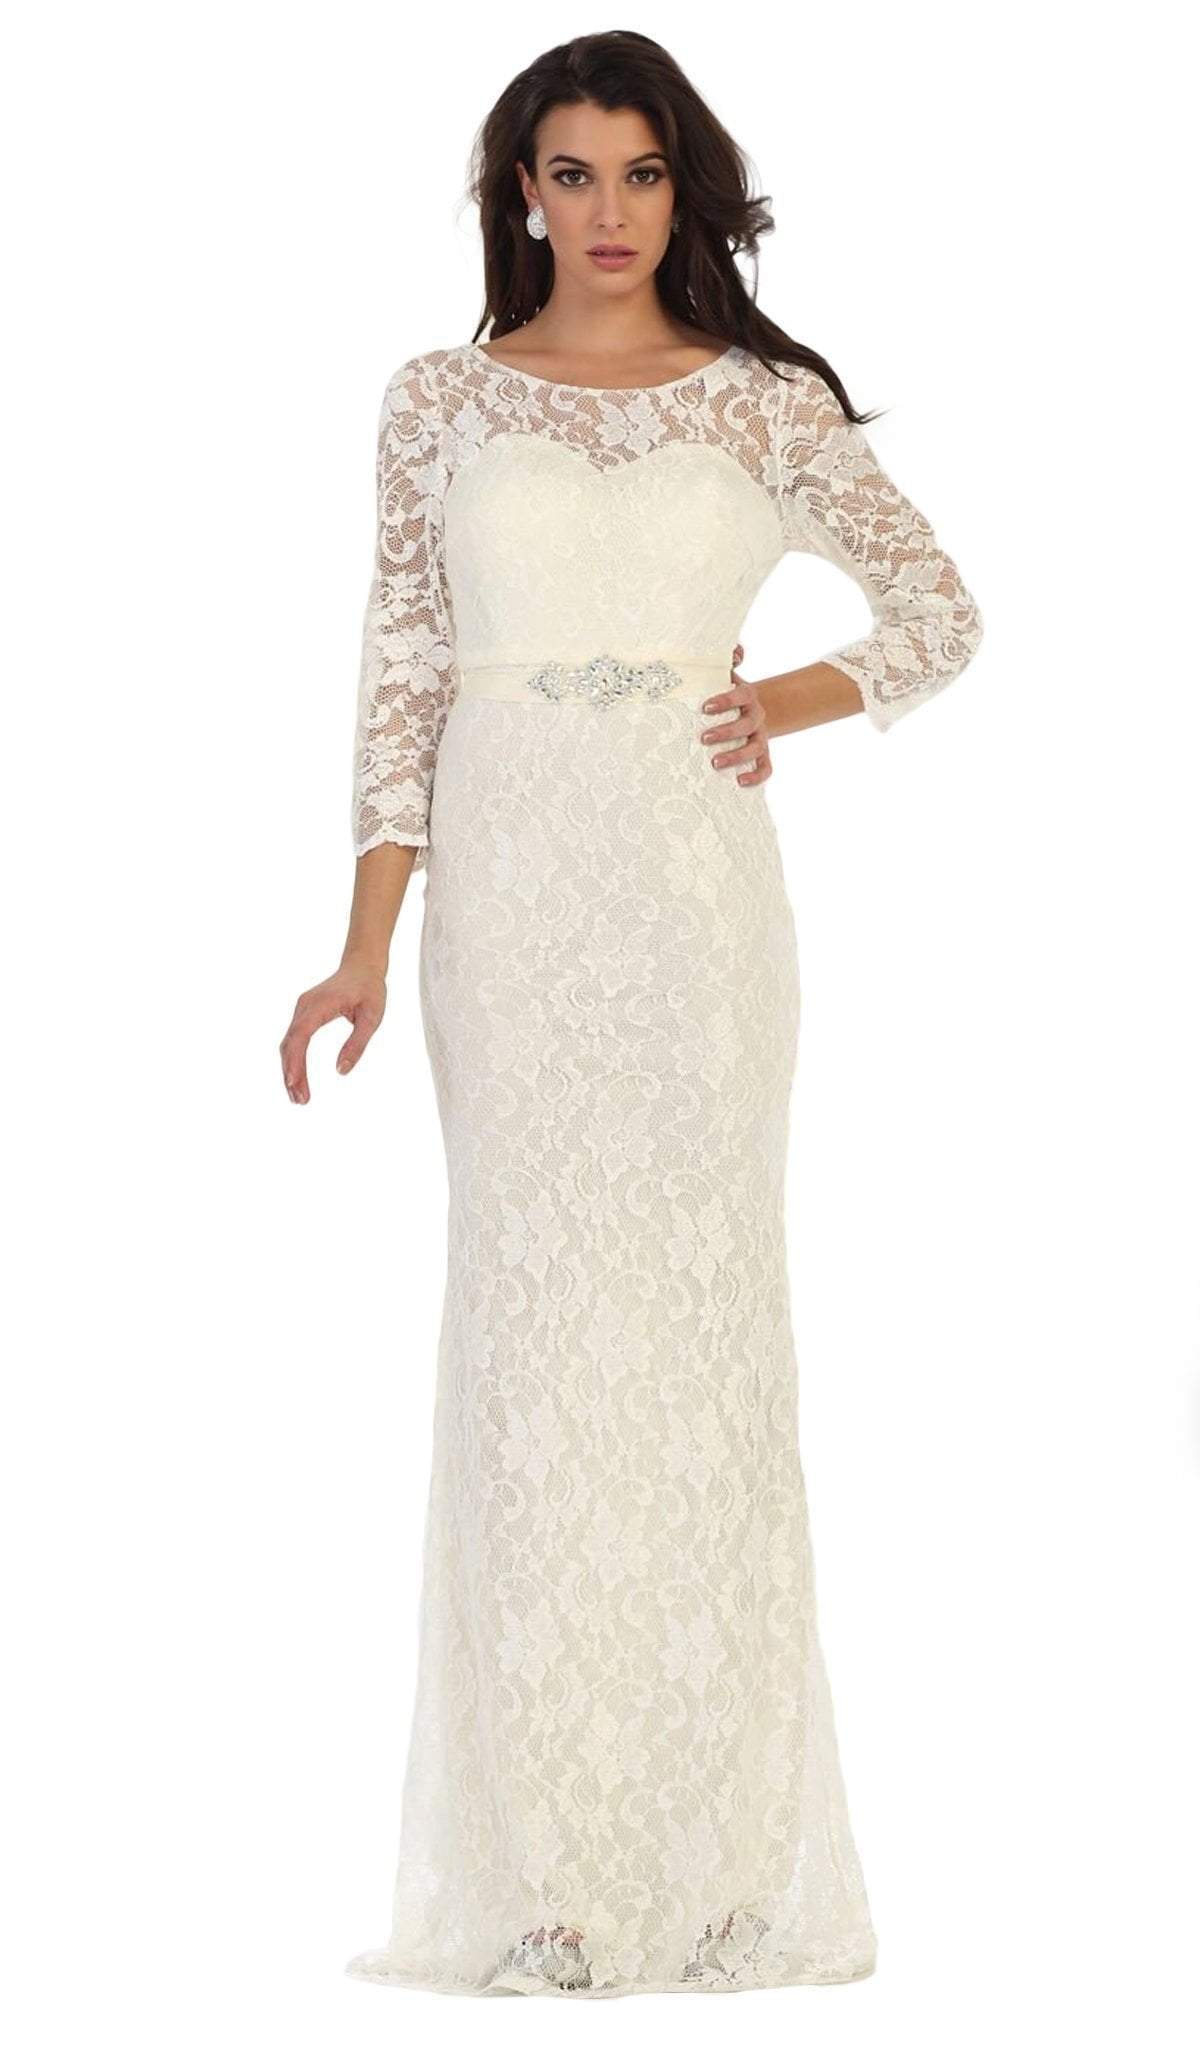 May Queen - Lace Illusion Bateau Sheath Mother of the Bride Dress Special Occasion Dress S / Ivory